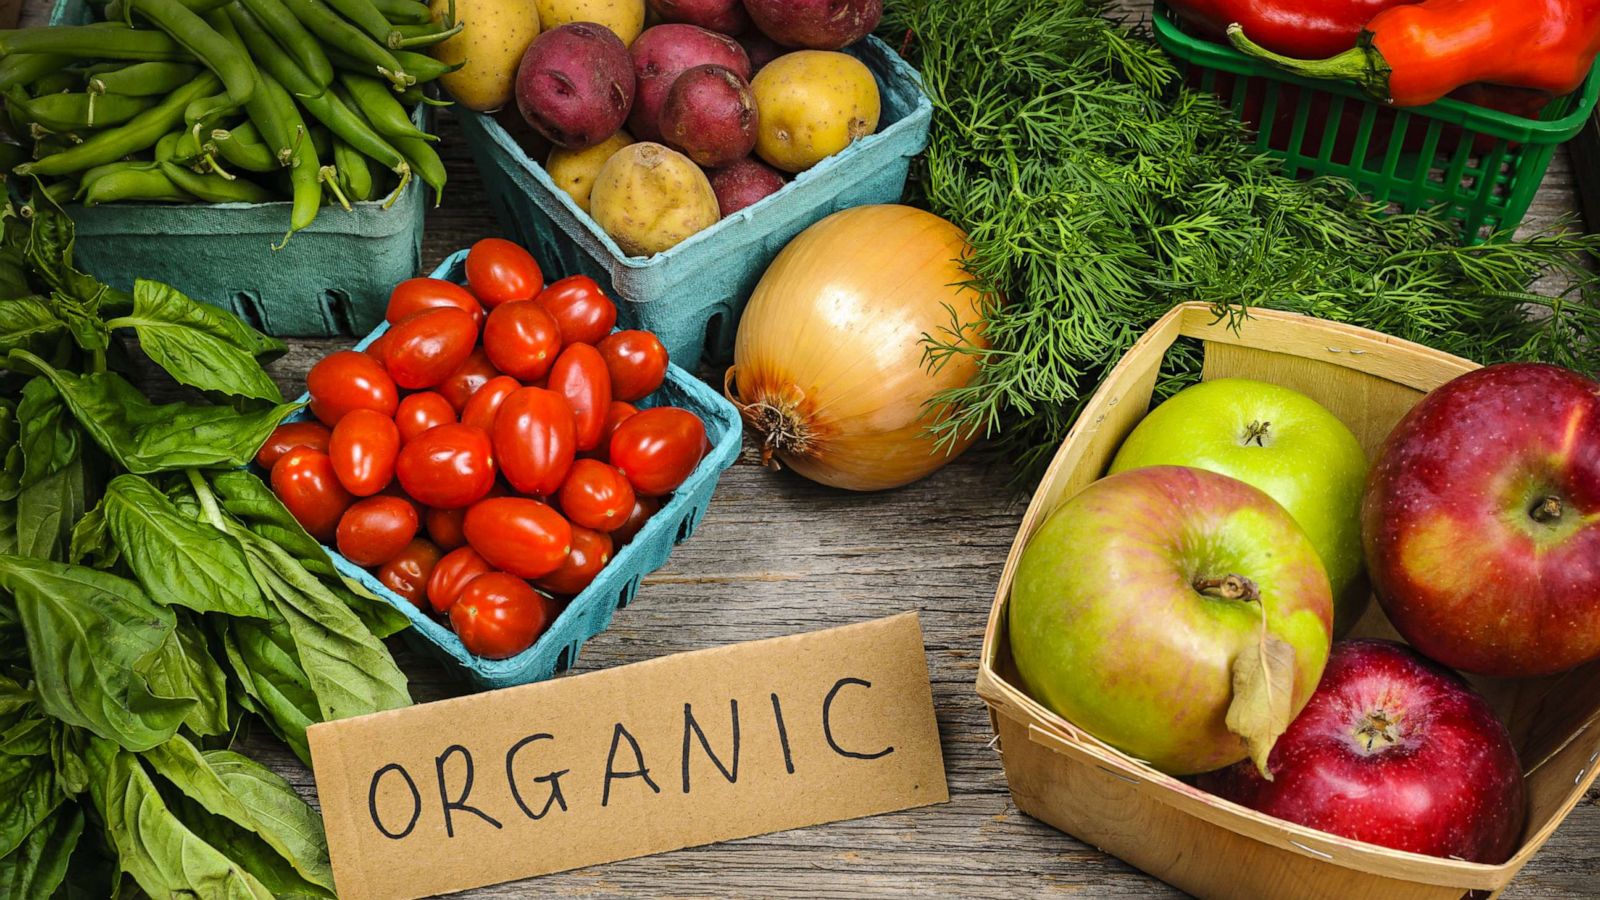 How to choose which fruits and vegetables to buy organic vs. non-organic -  ABC News